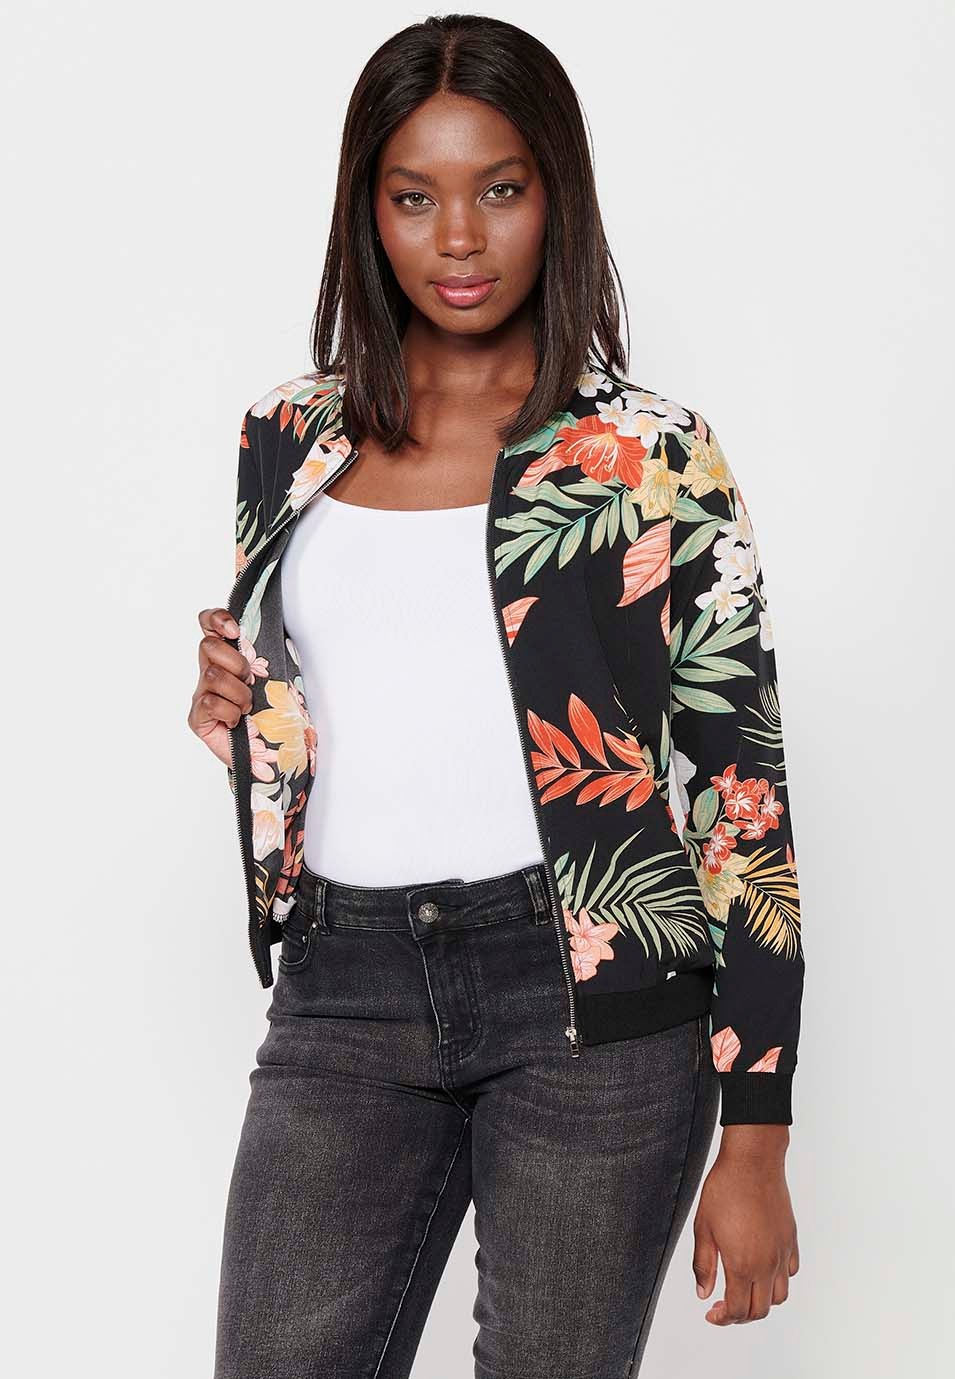 Long-sleeved sweatshirt jacket with ribbed finishes and floral print with front zipper closure in Multicolor for Women 6